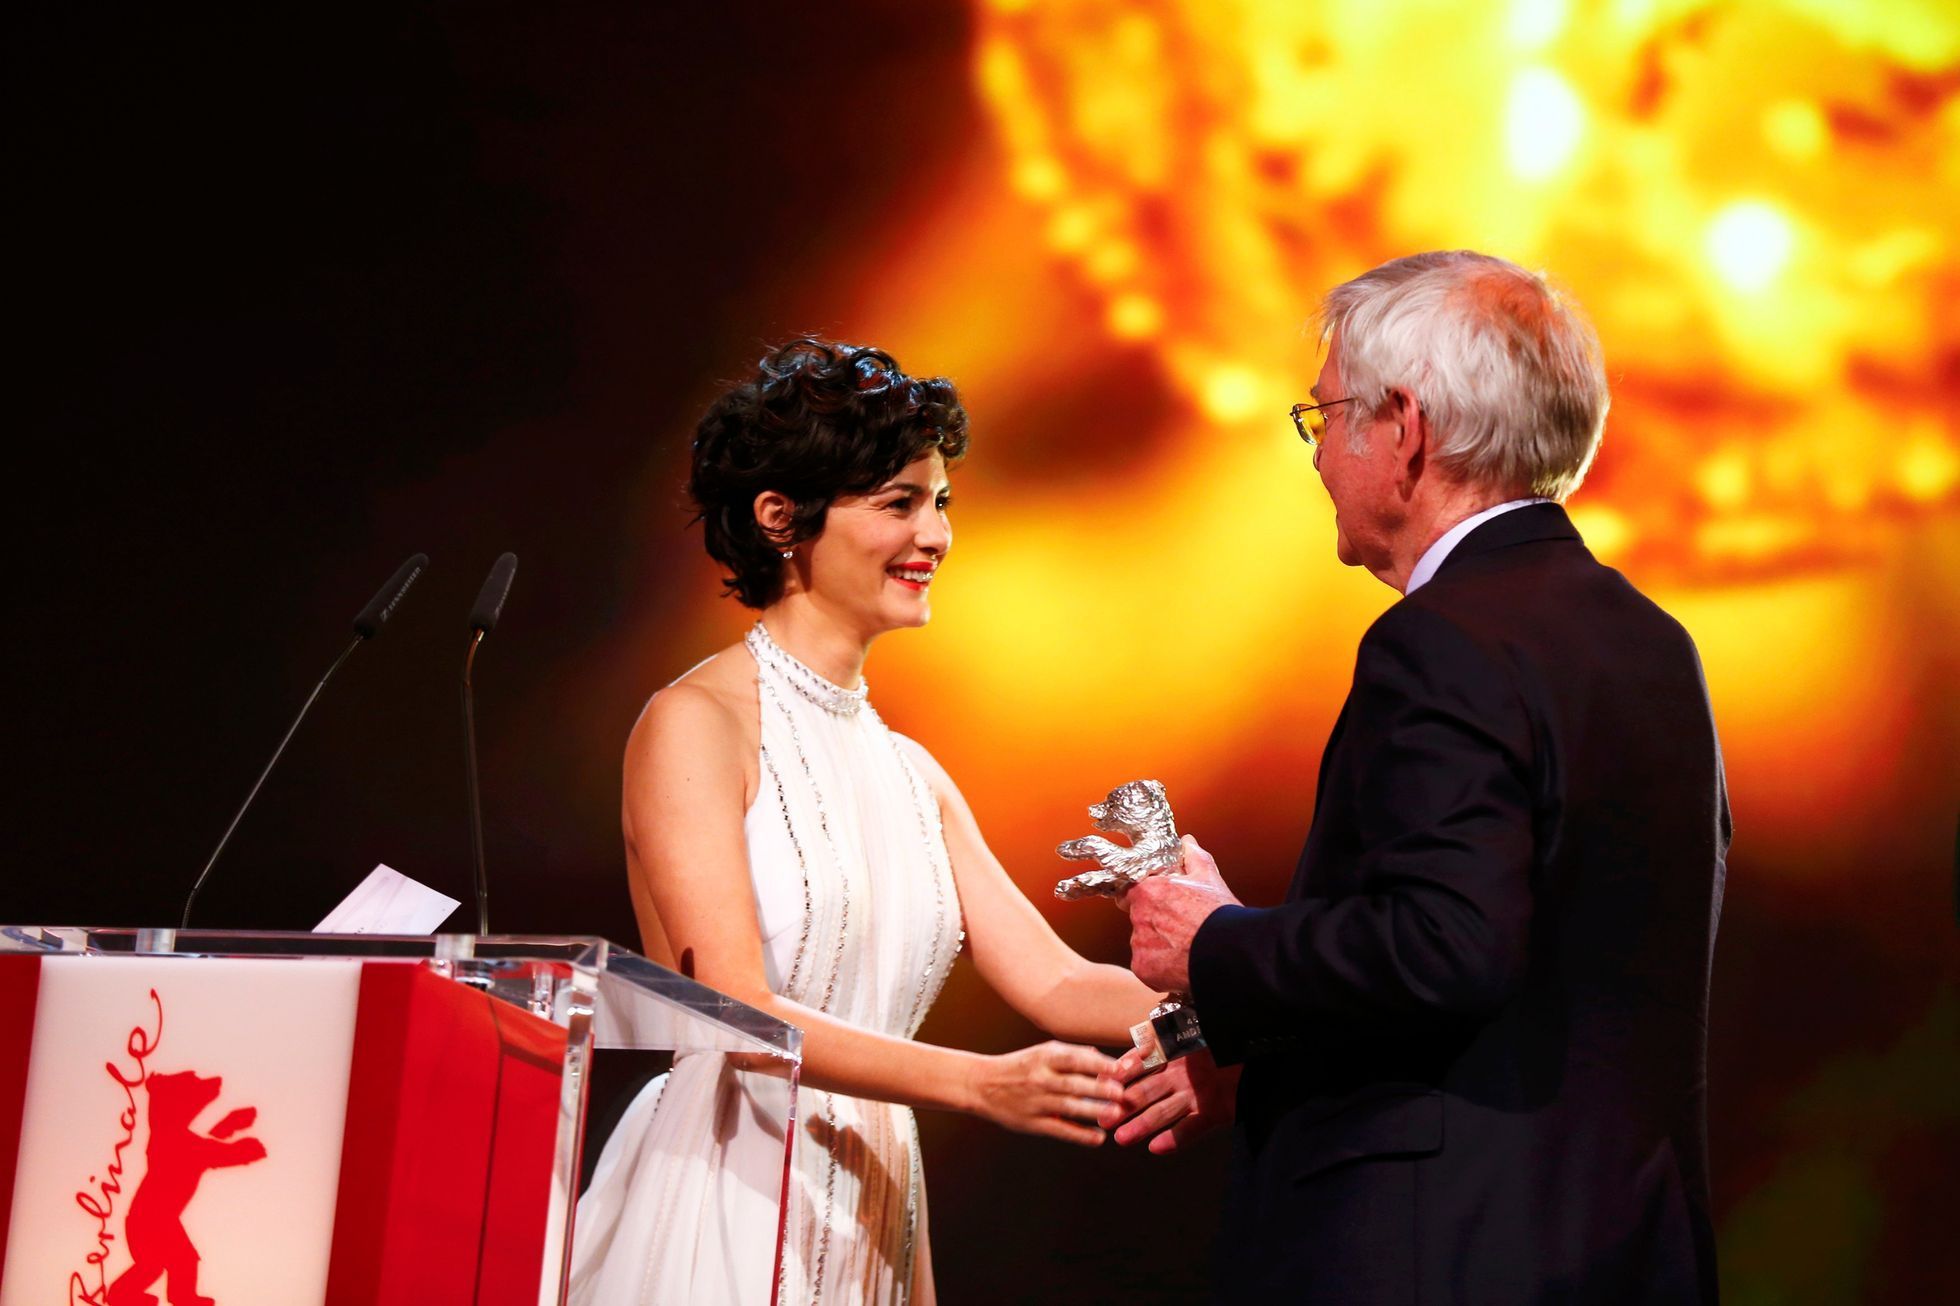 Actress Tautou hands over the Silver Bear for Best Actor for the film '45 Years' to actor Courtenay at the awards ceremony of the 65th Berlinale International Film Festival in Berlin